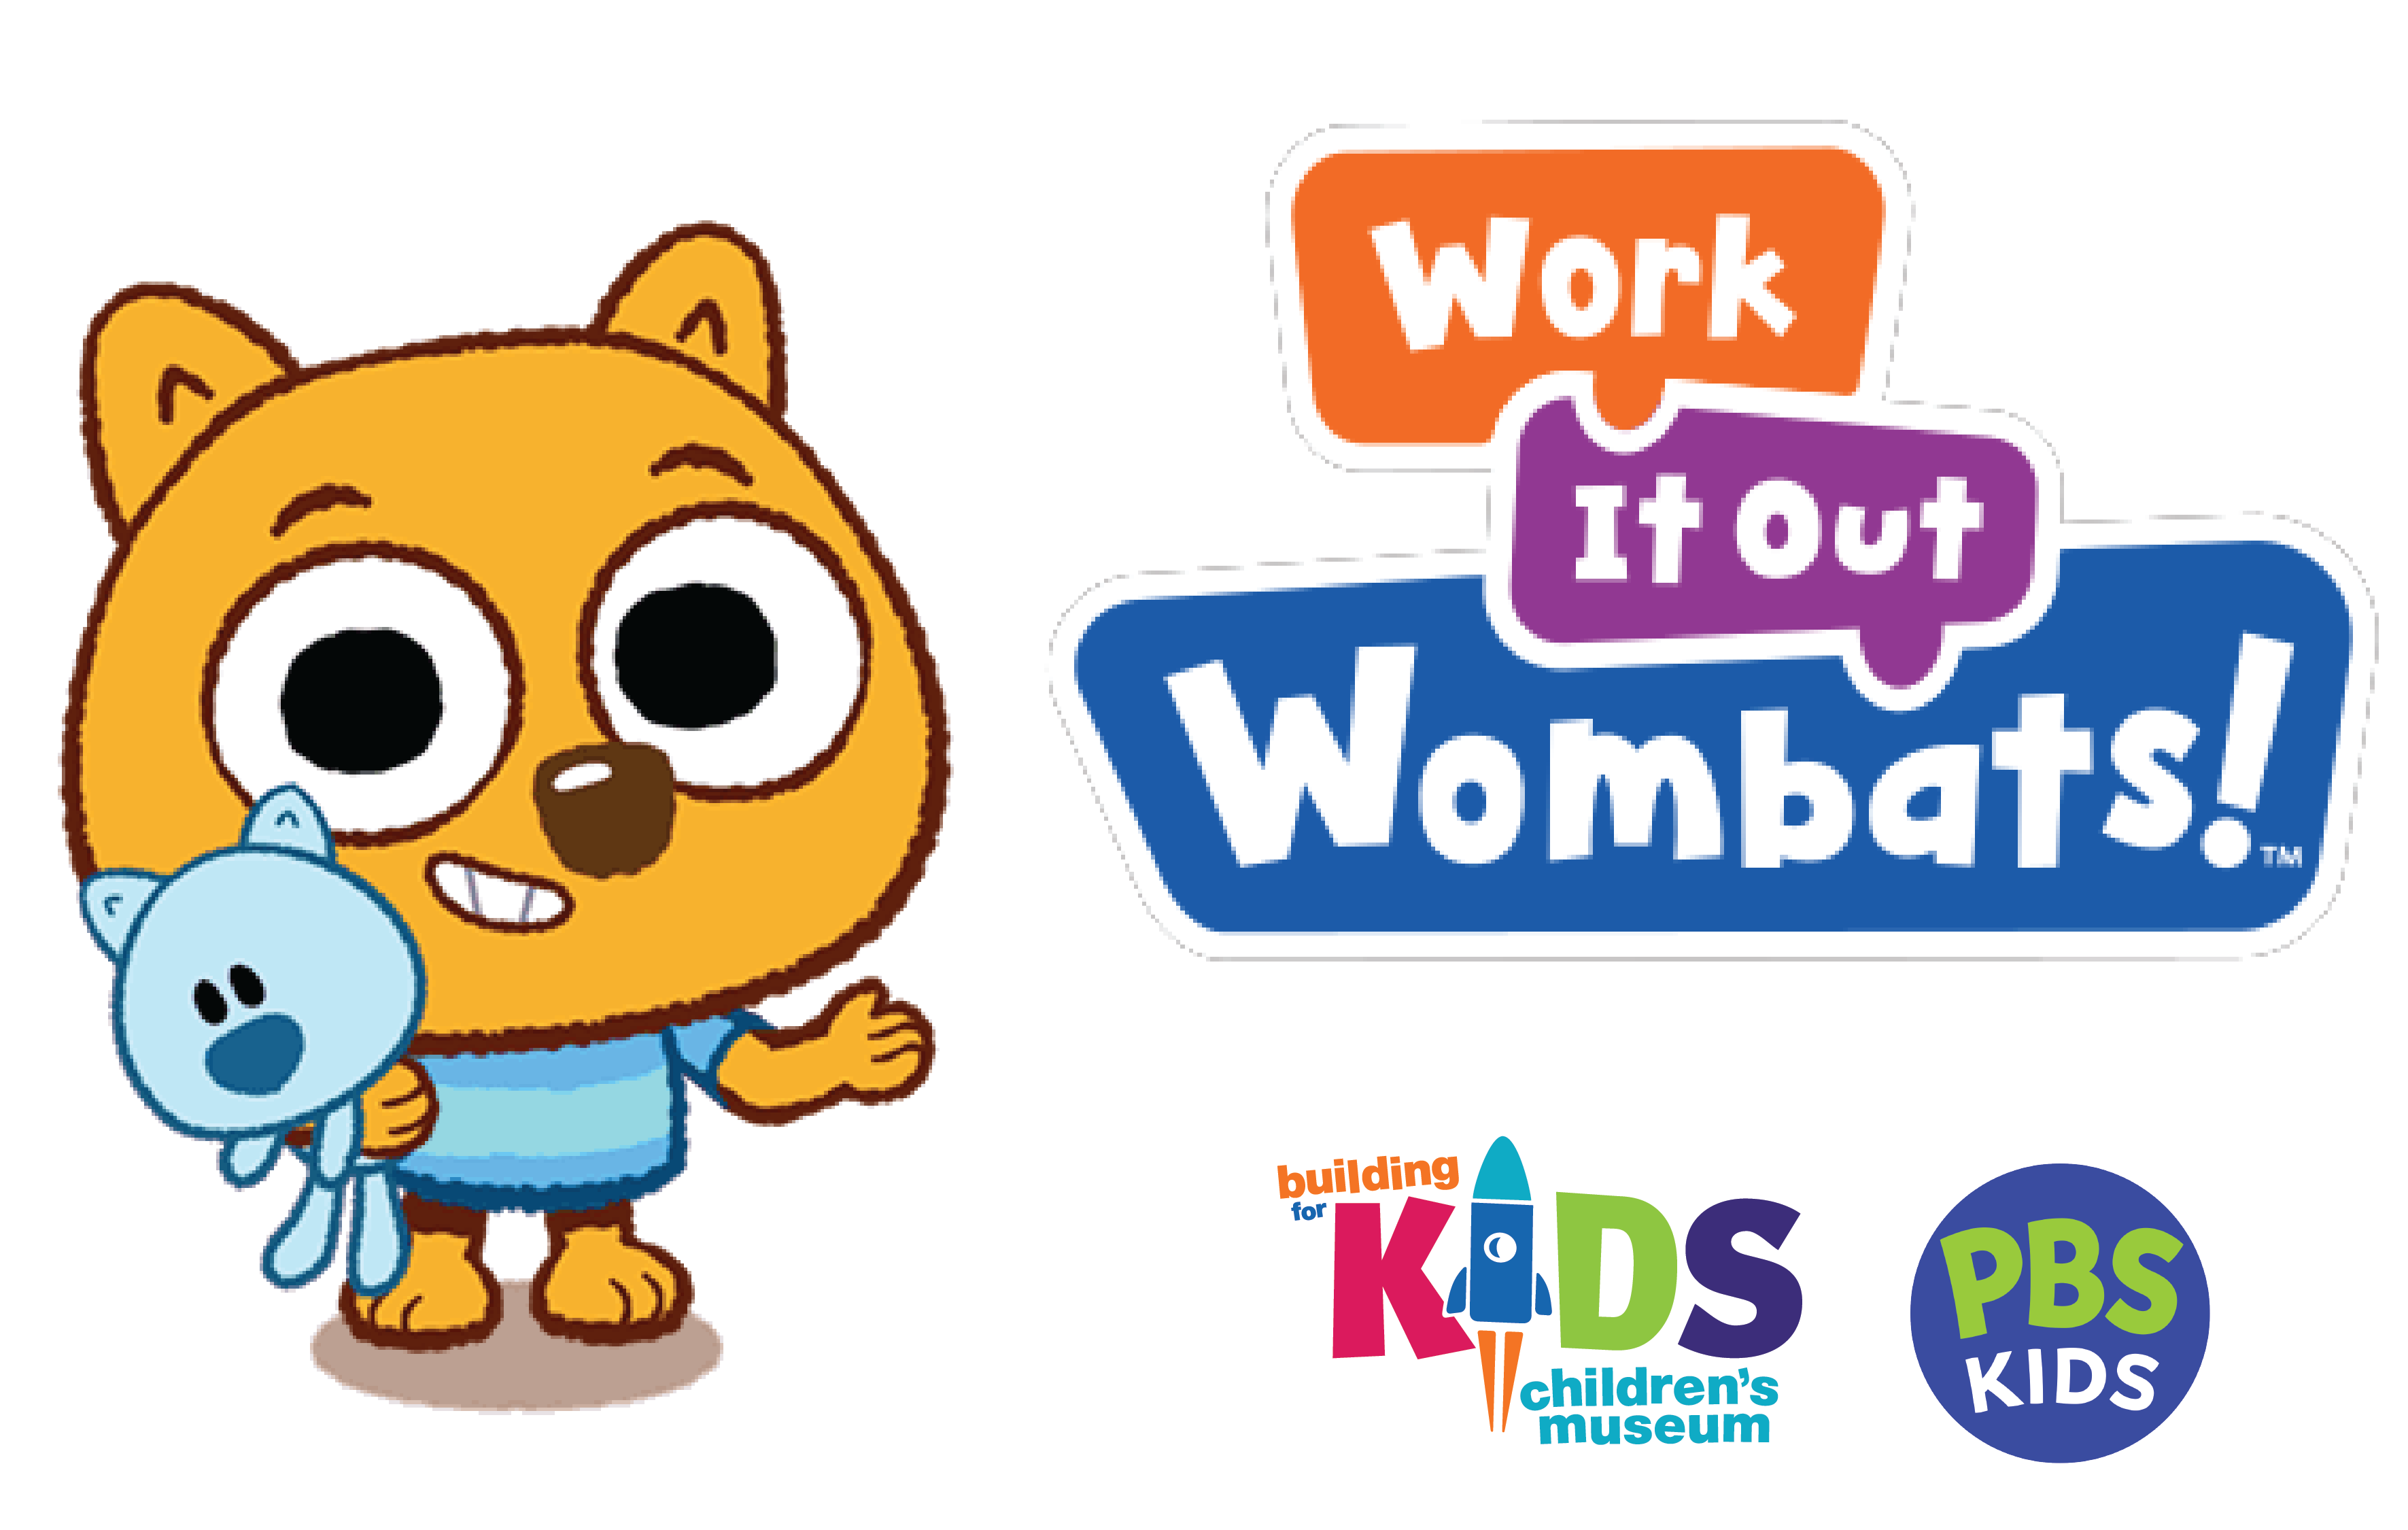 Work It Out Wombats visit the BFK!